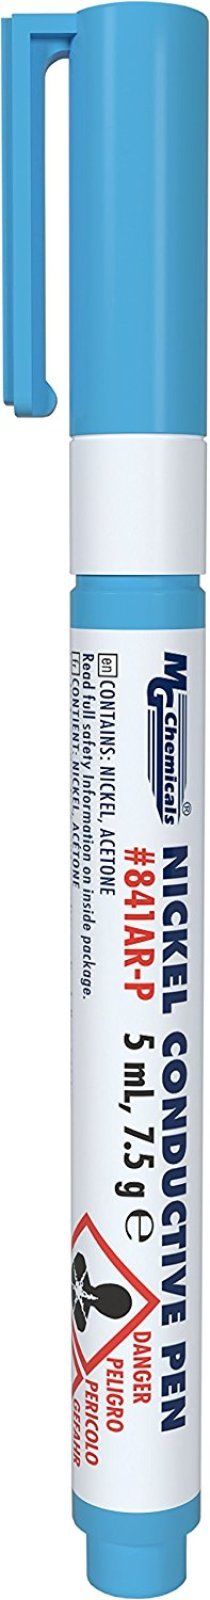 Nickel Conductive Pen Silver Ink Repair Writer Paint Conect Surface Fast Dry NEW